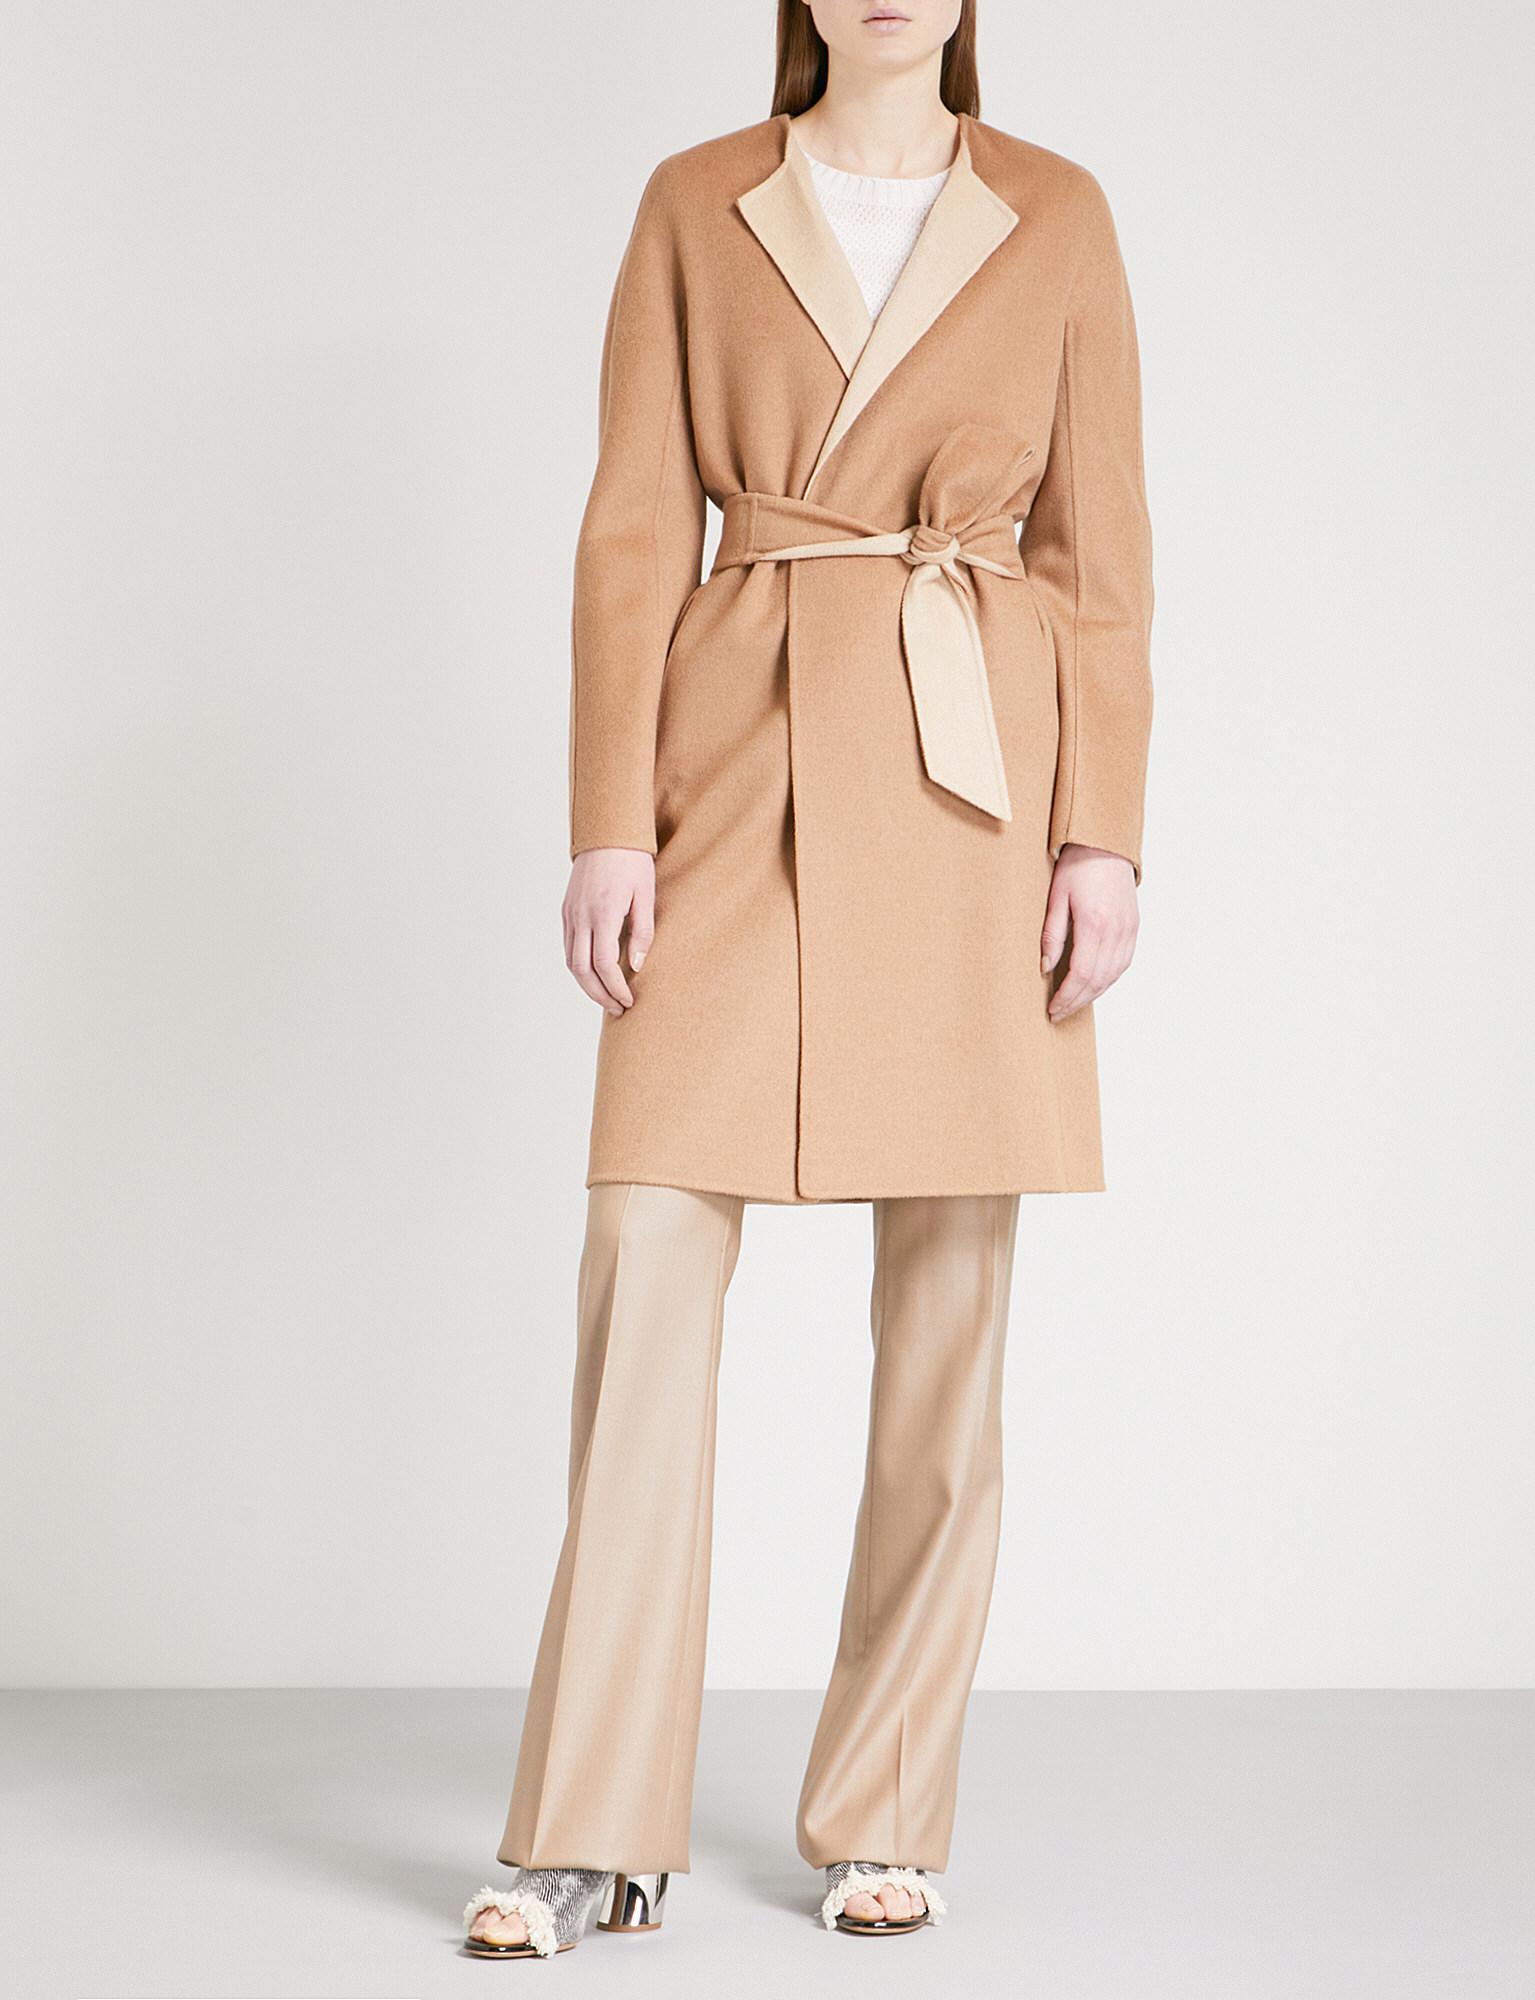 Max Mara Alice Camel Hair And Wool-blend Wrap Coat in Natural - Lyst